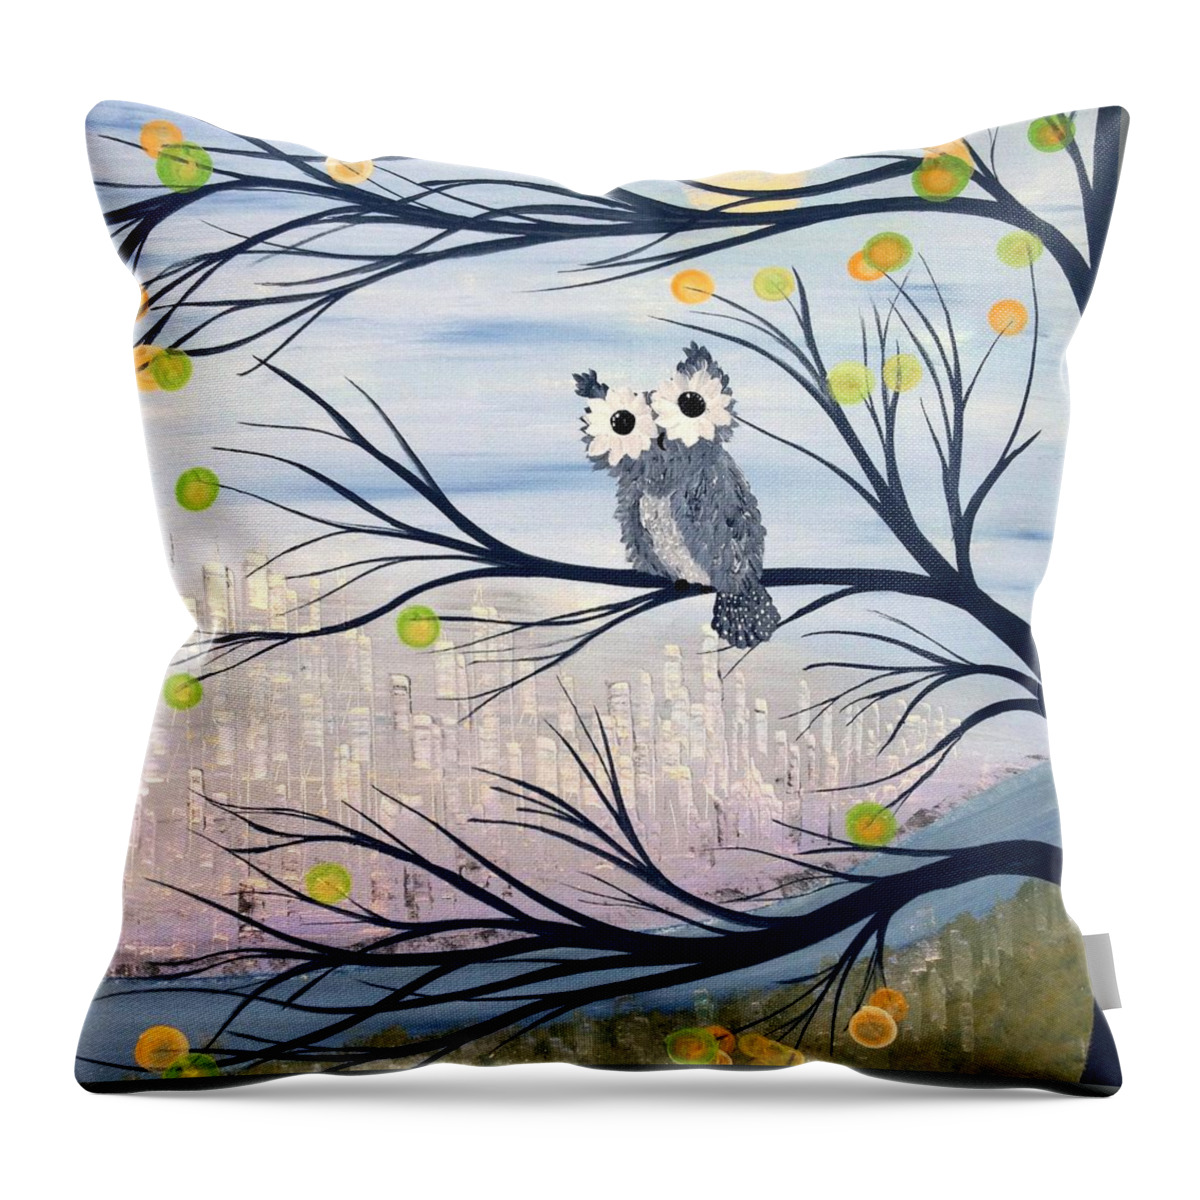 Owl Throw Pillow featuring the painting Hoos City by MiMi Stirn